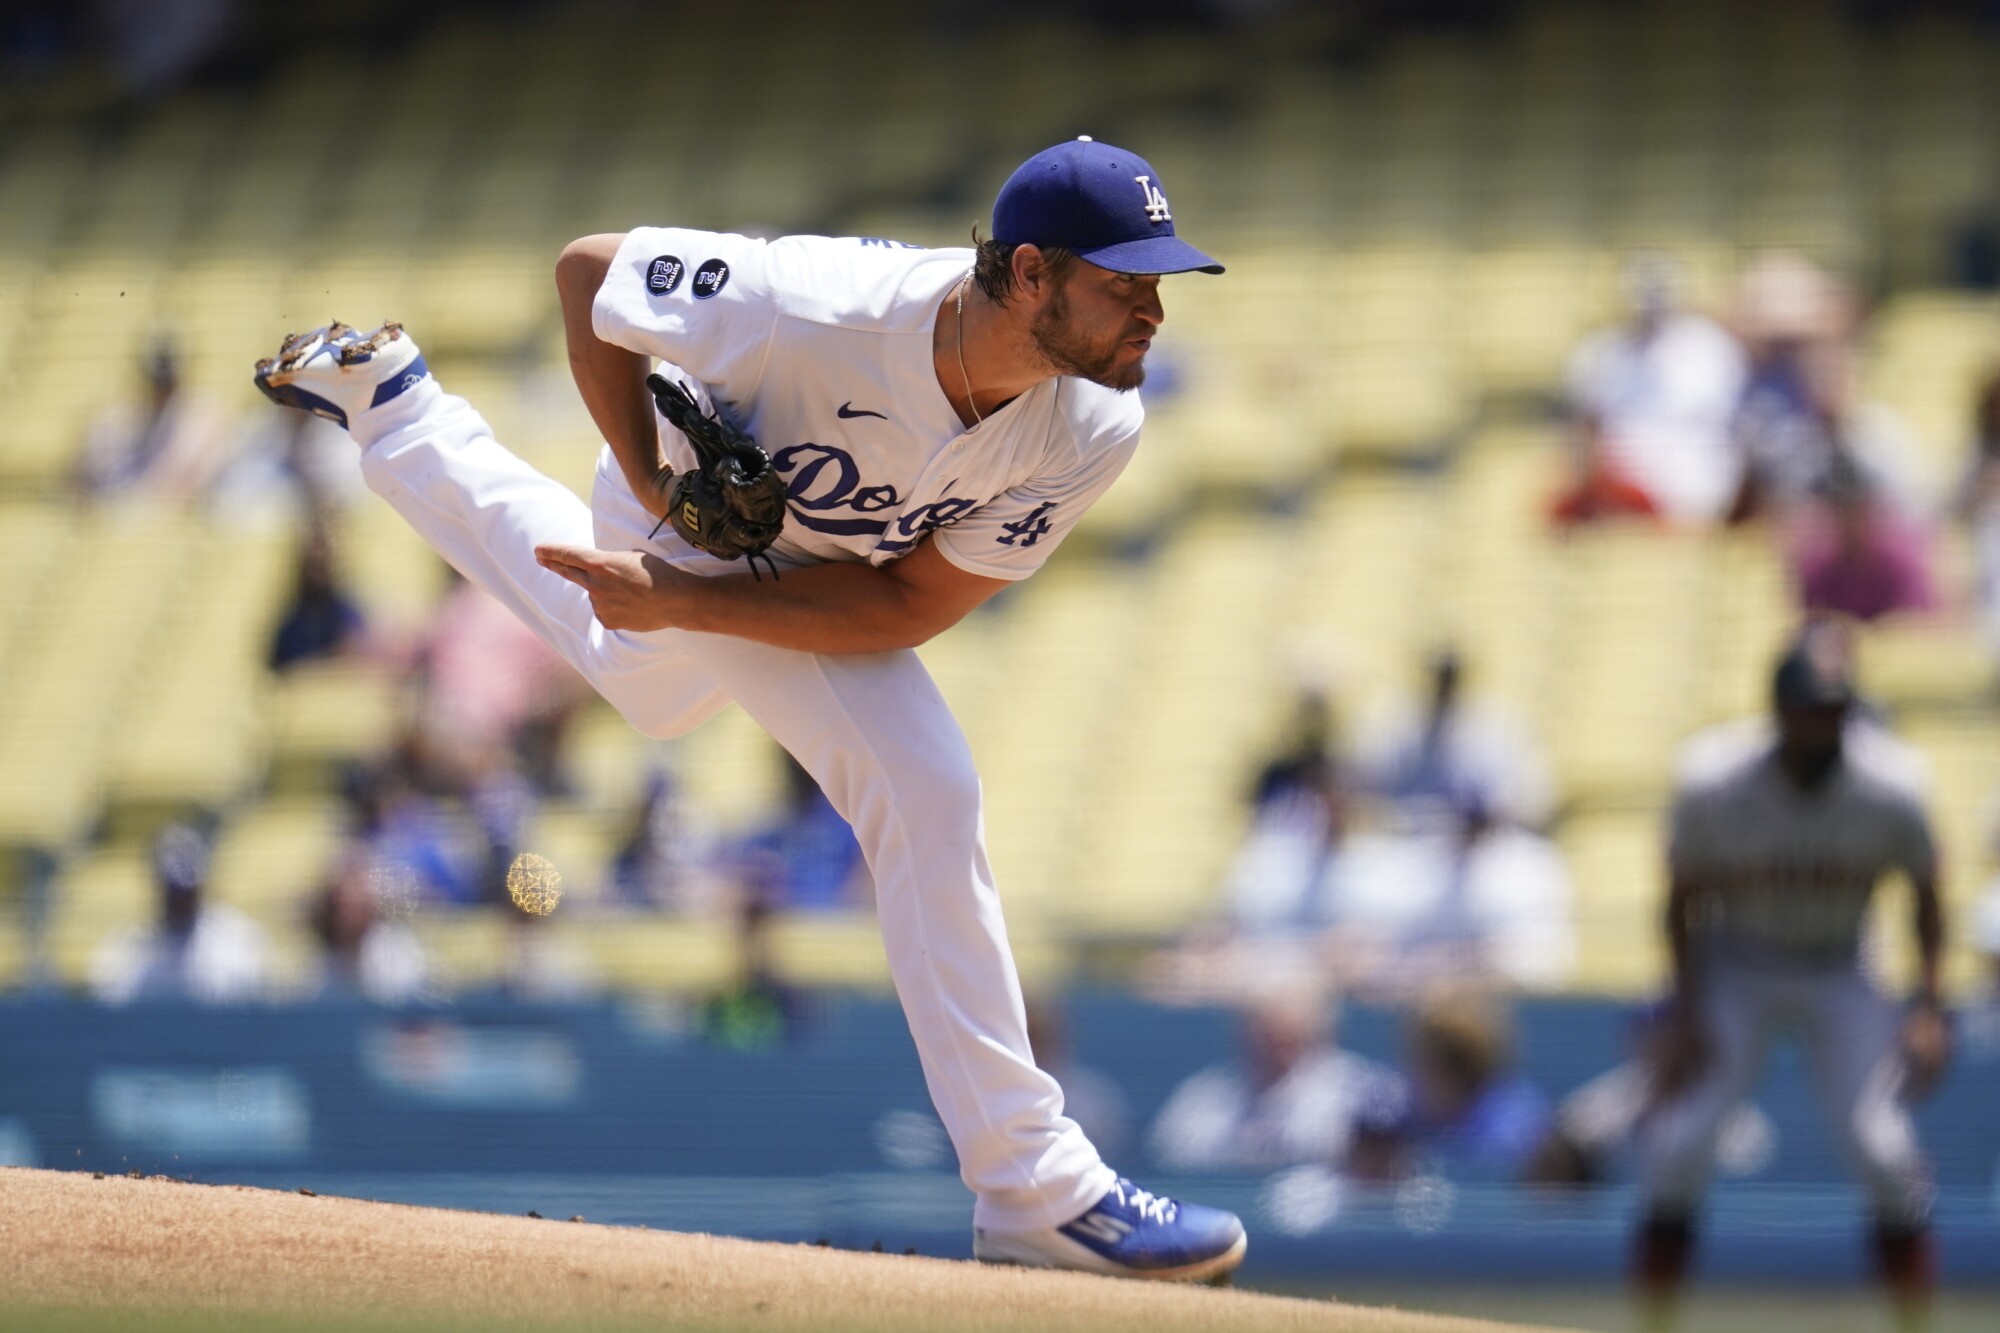 Dodgers starting pitcher Clayton Kershaw delivers during the first inning.